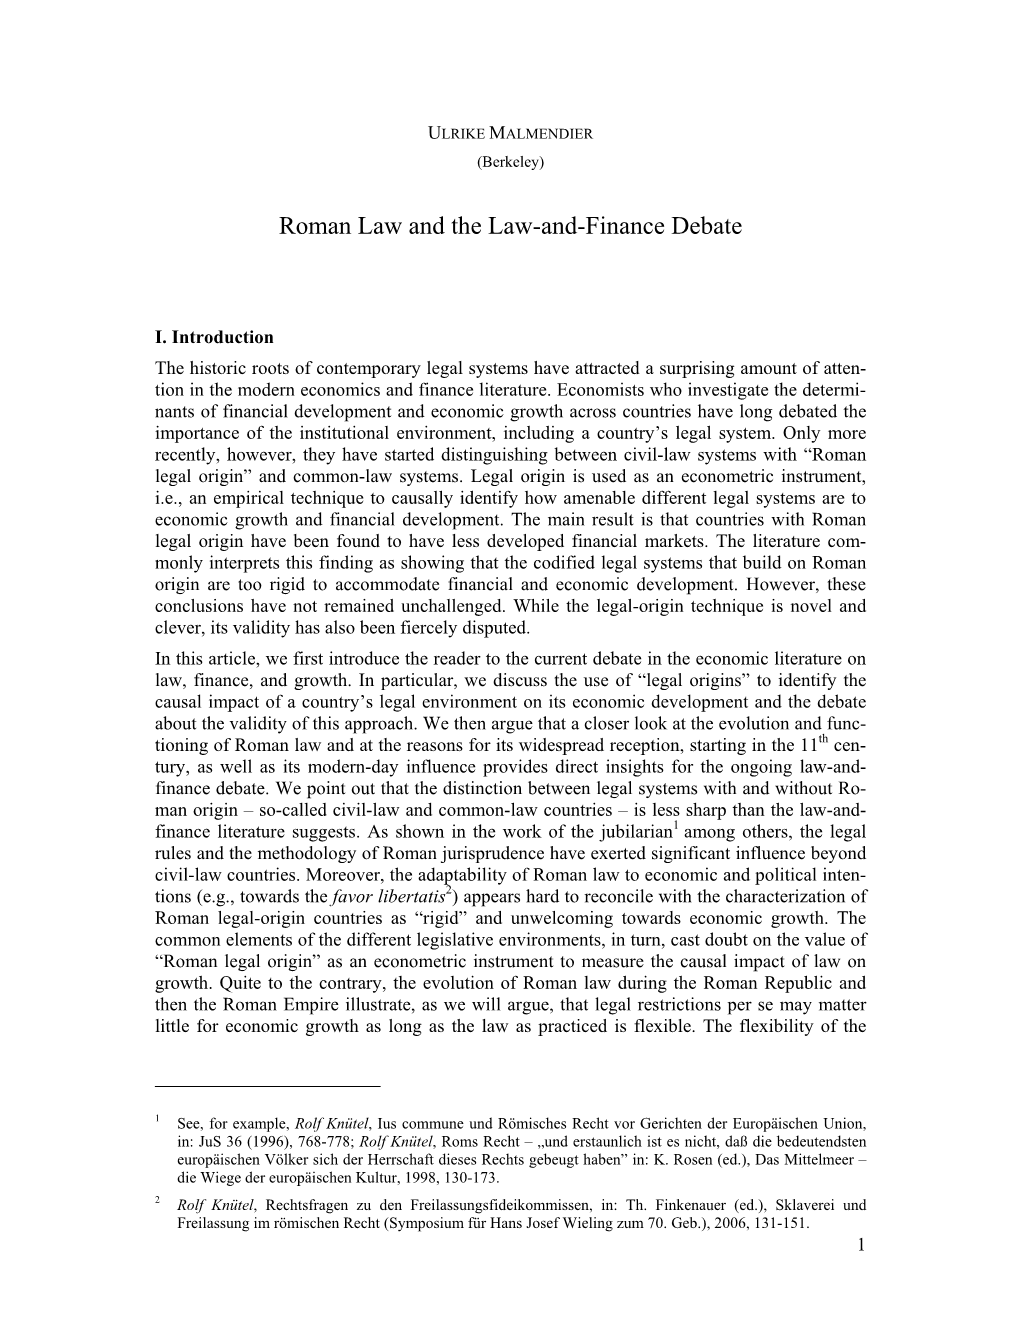 Roman Law and the Law-And-Finance Debate